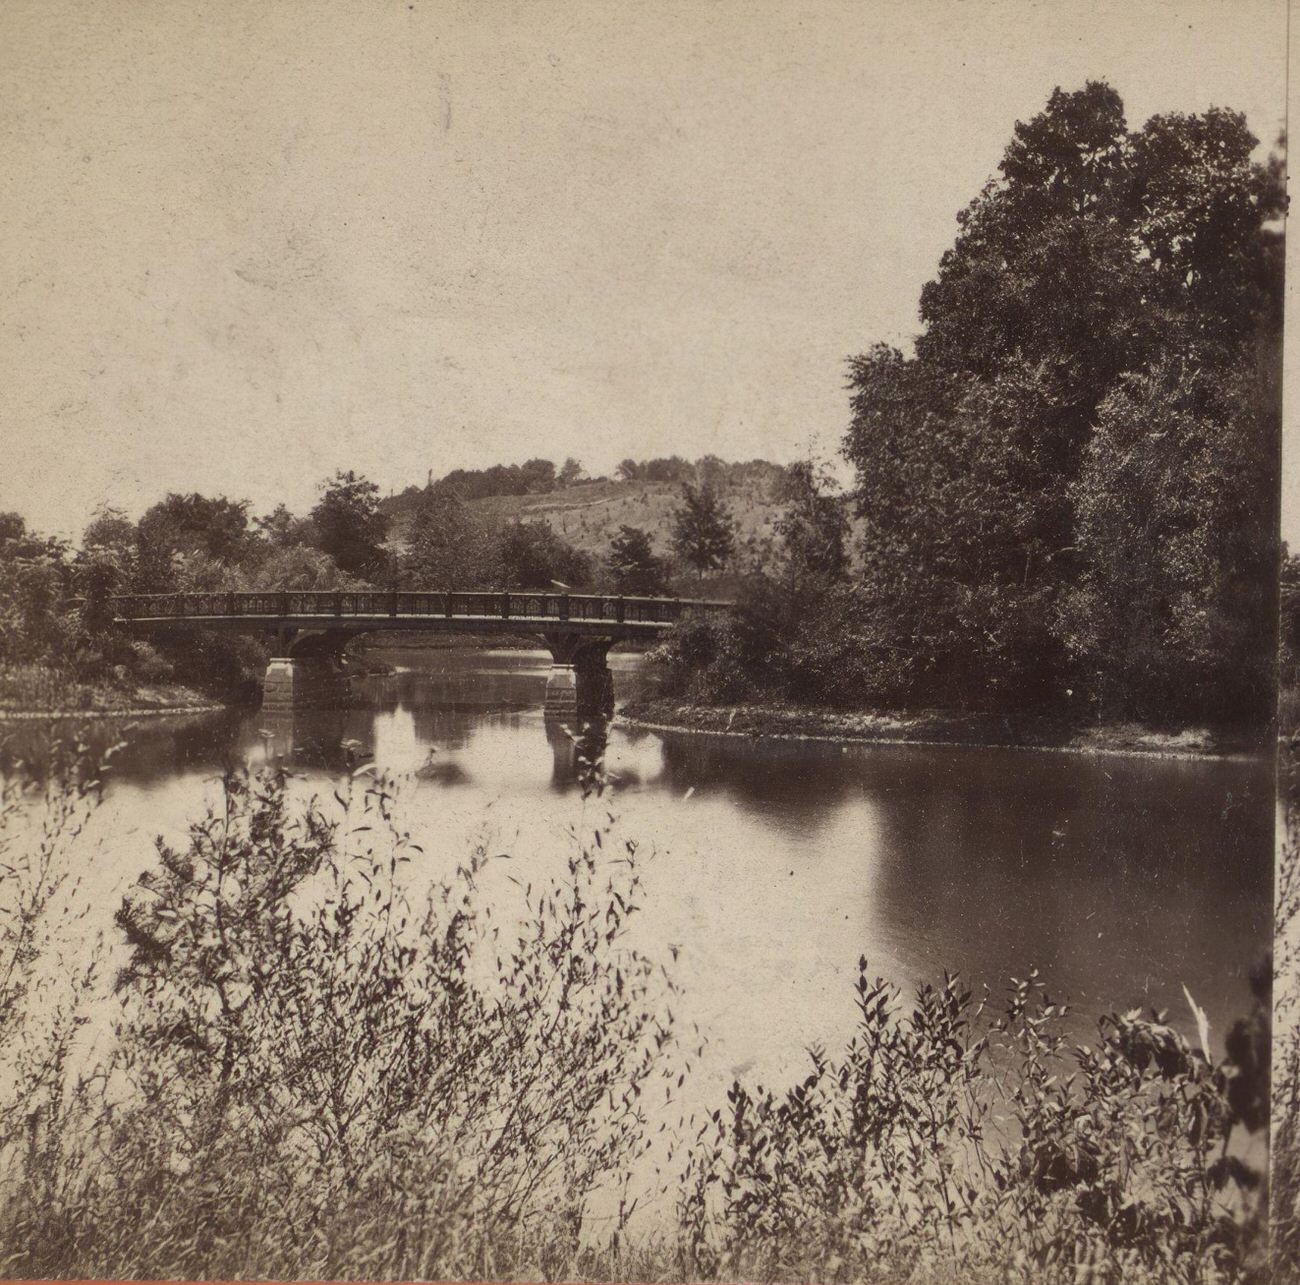 View Looking South From Lullwater Bridge In Prospect Park, Brooklyn